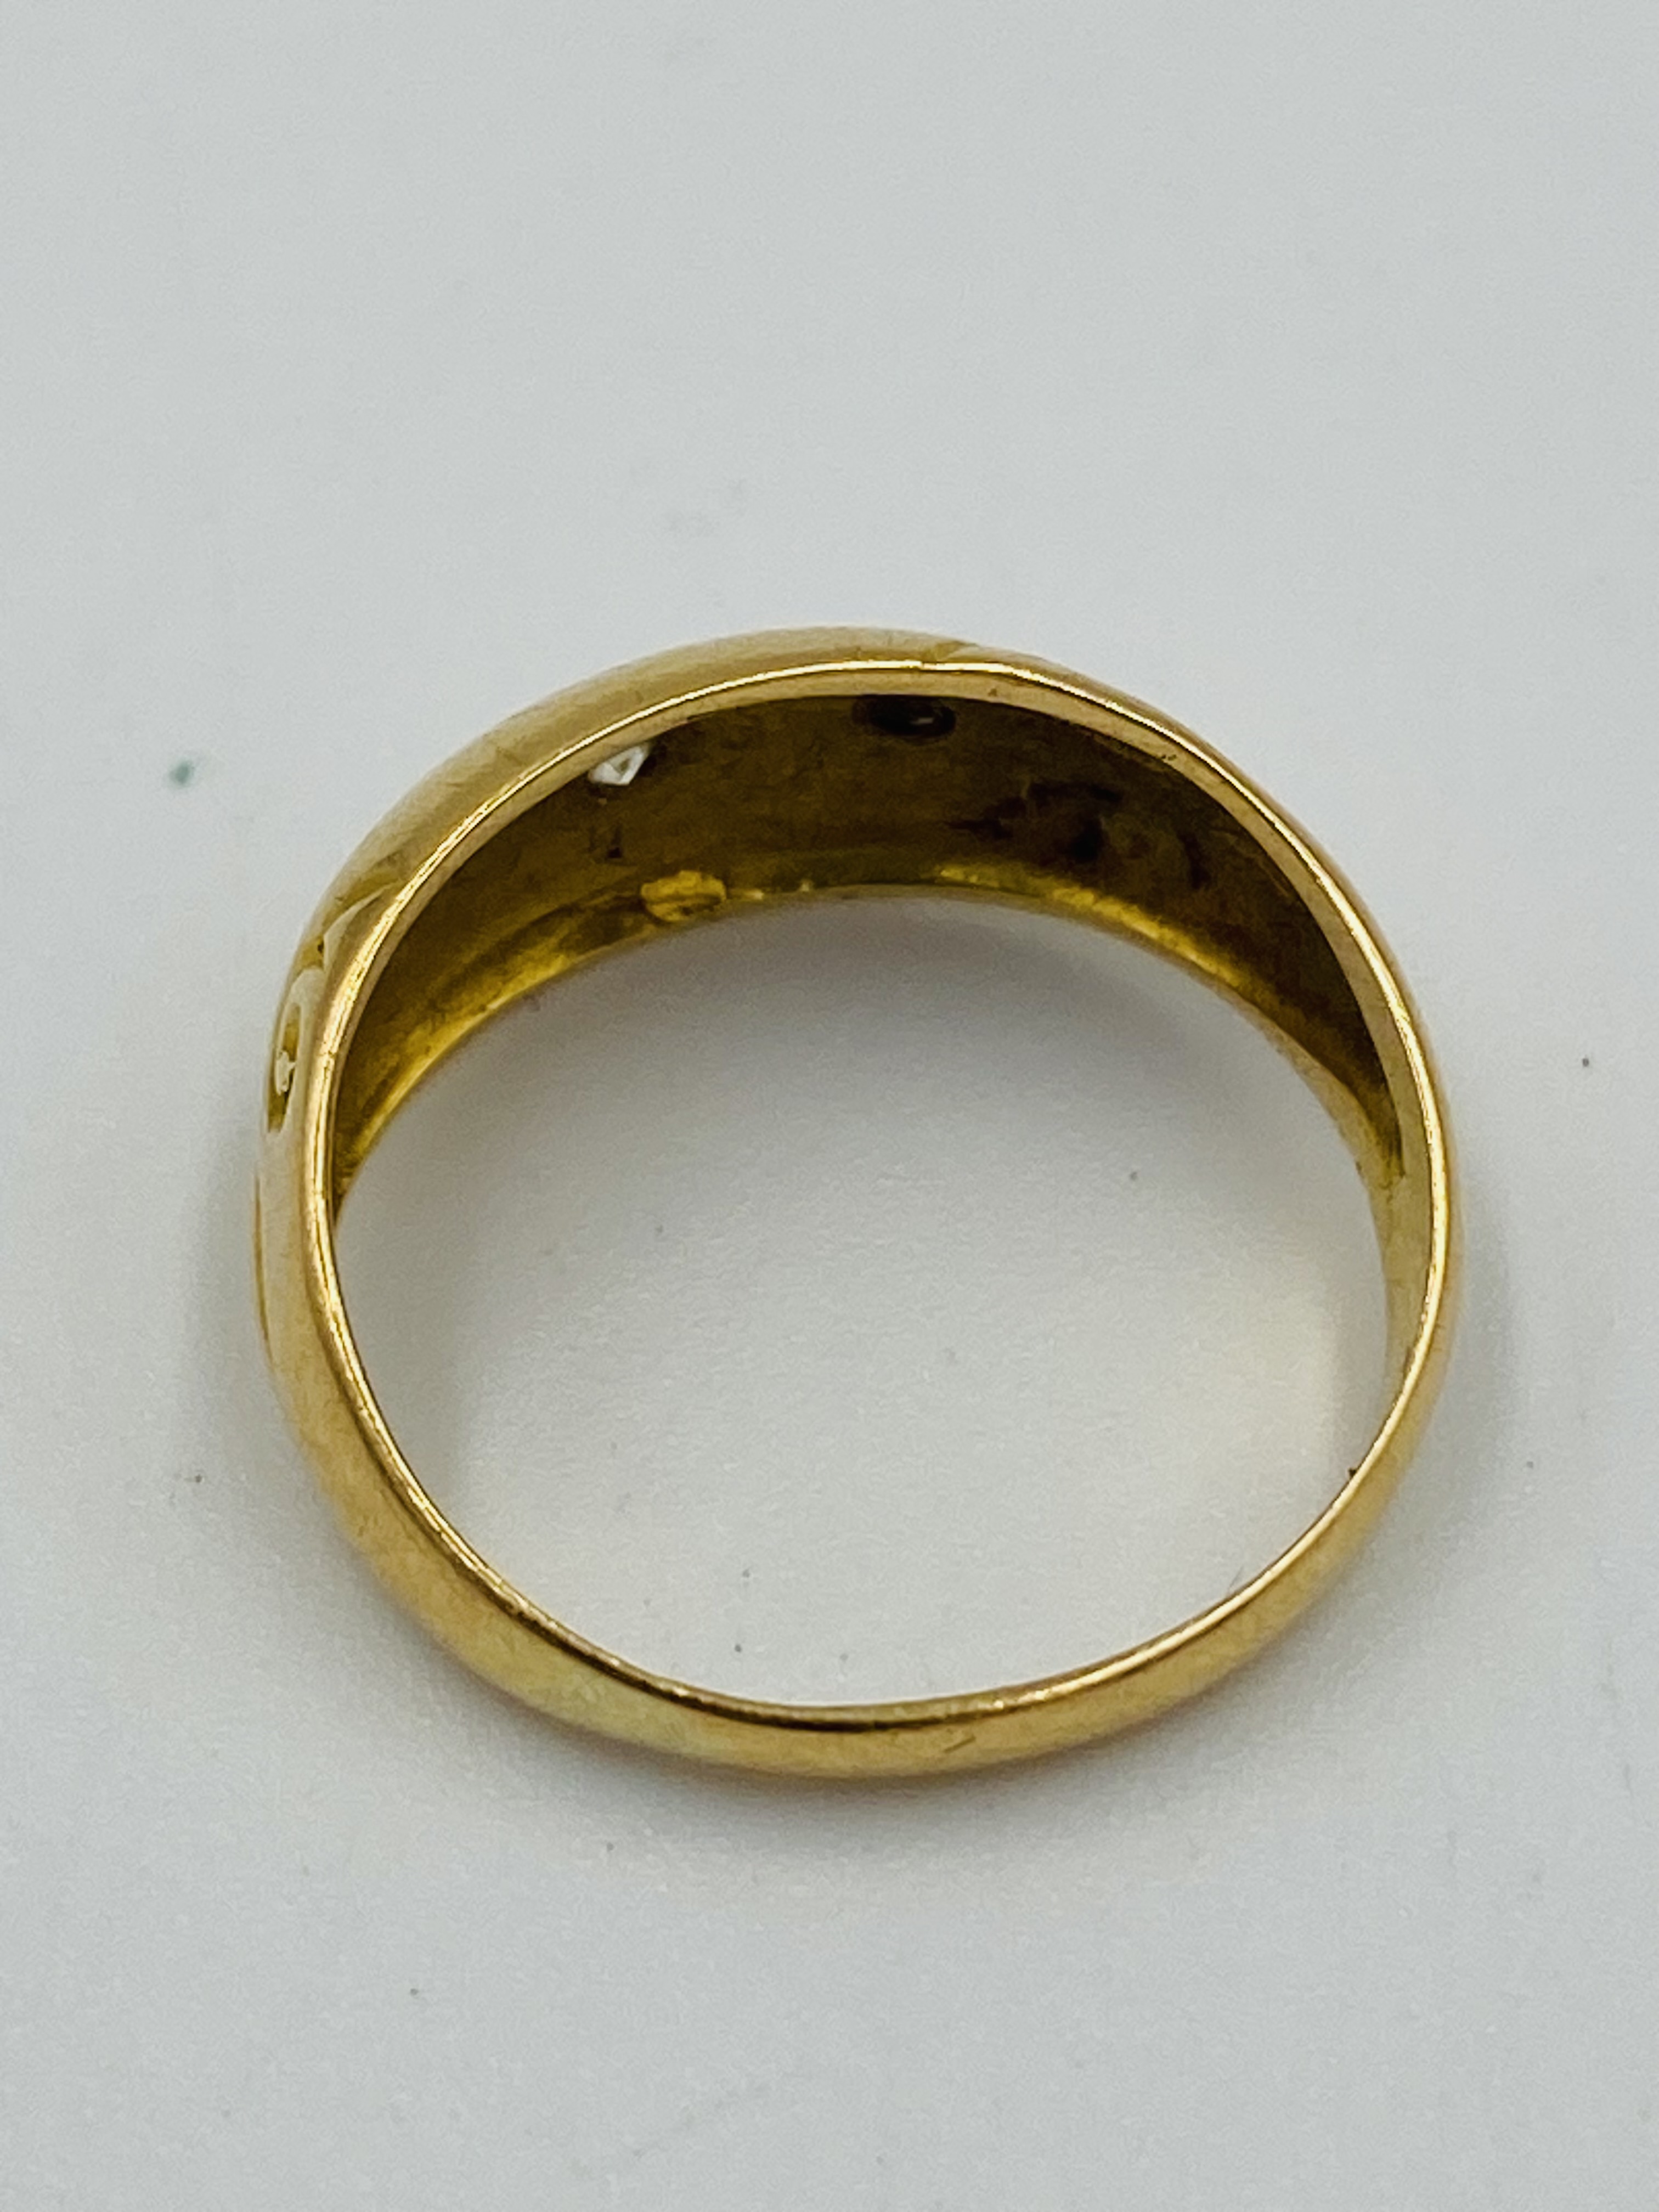 18ct gold ring set with a diamond - Image 4 of 4